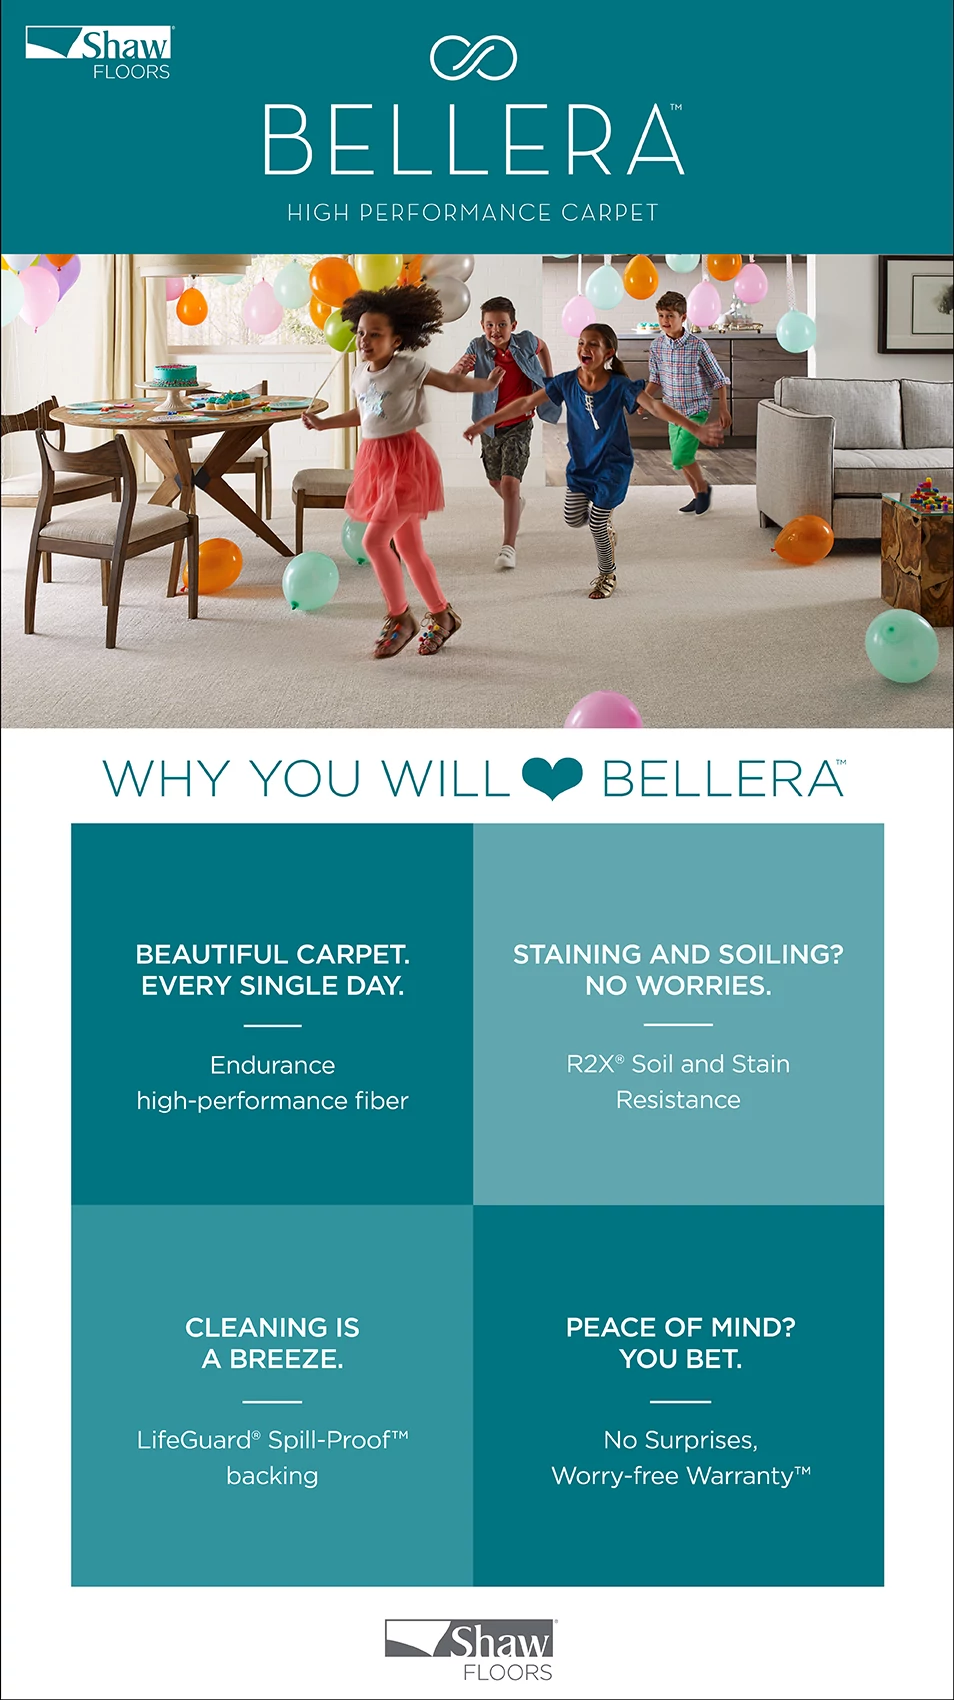 Why you will love bellera carpet graphic